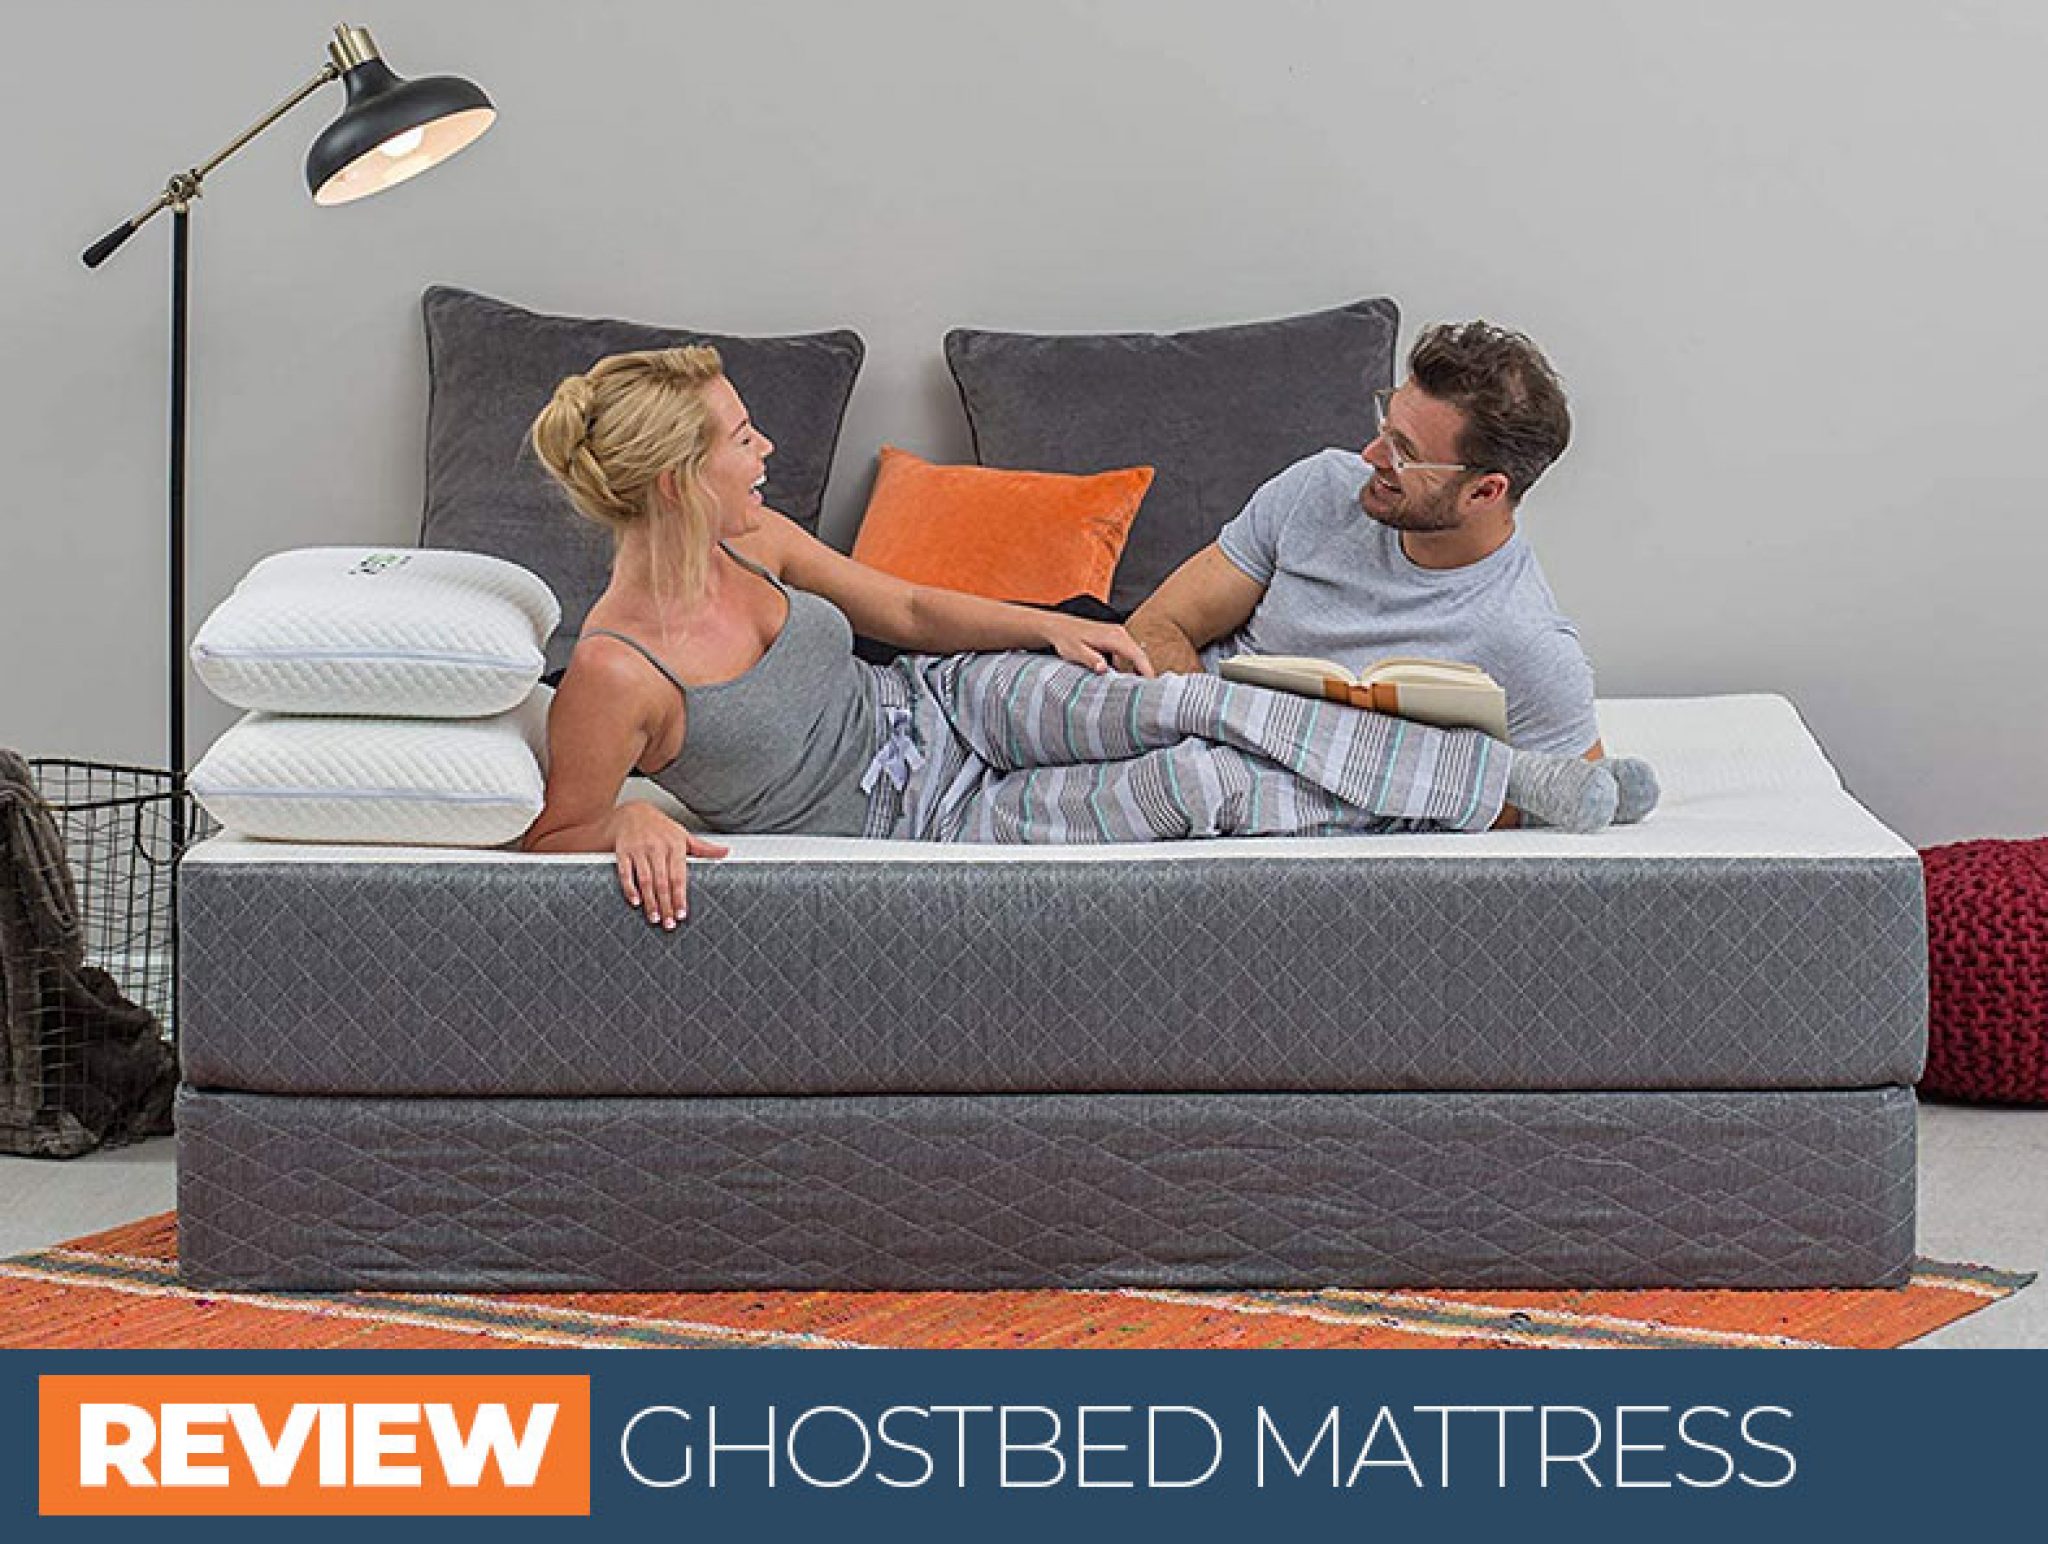 delivery mattress reviews ghostbed